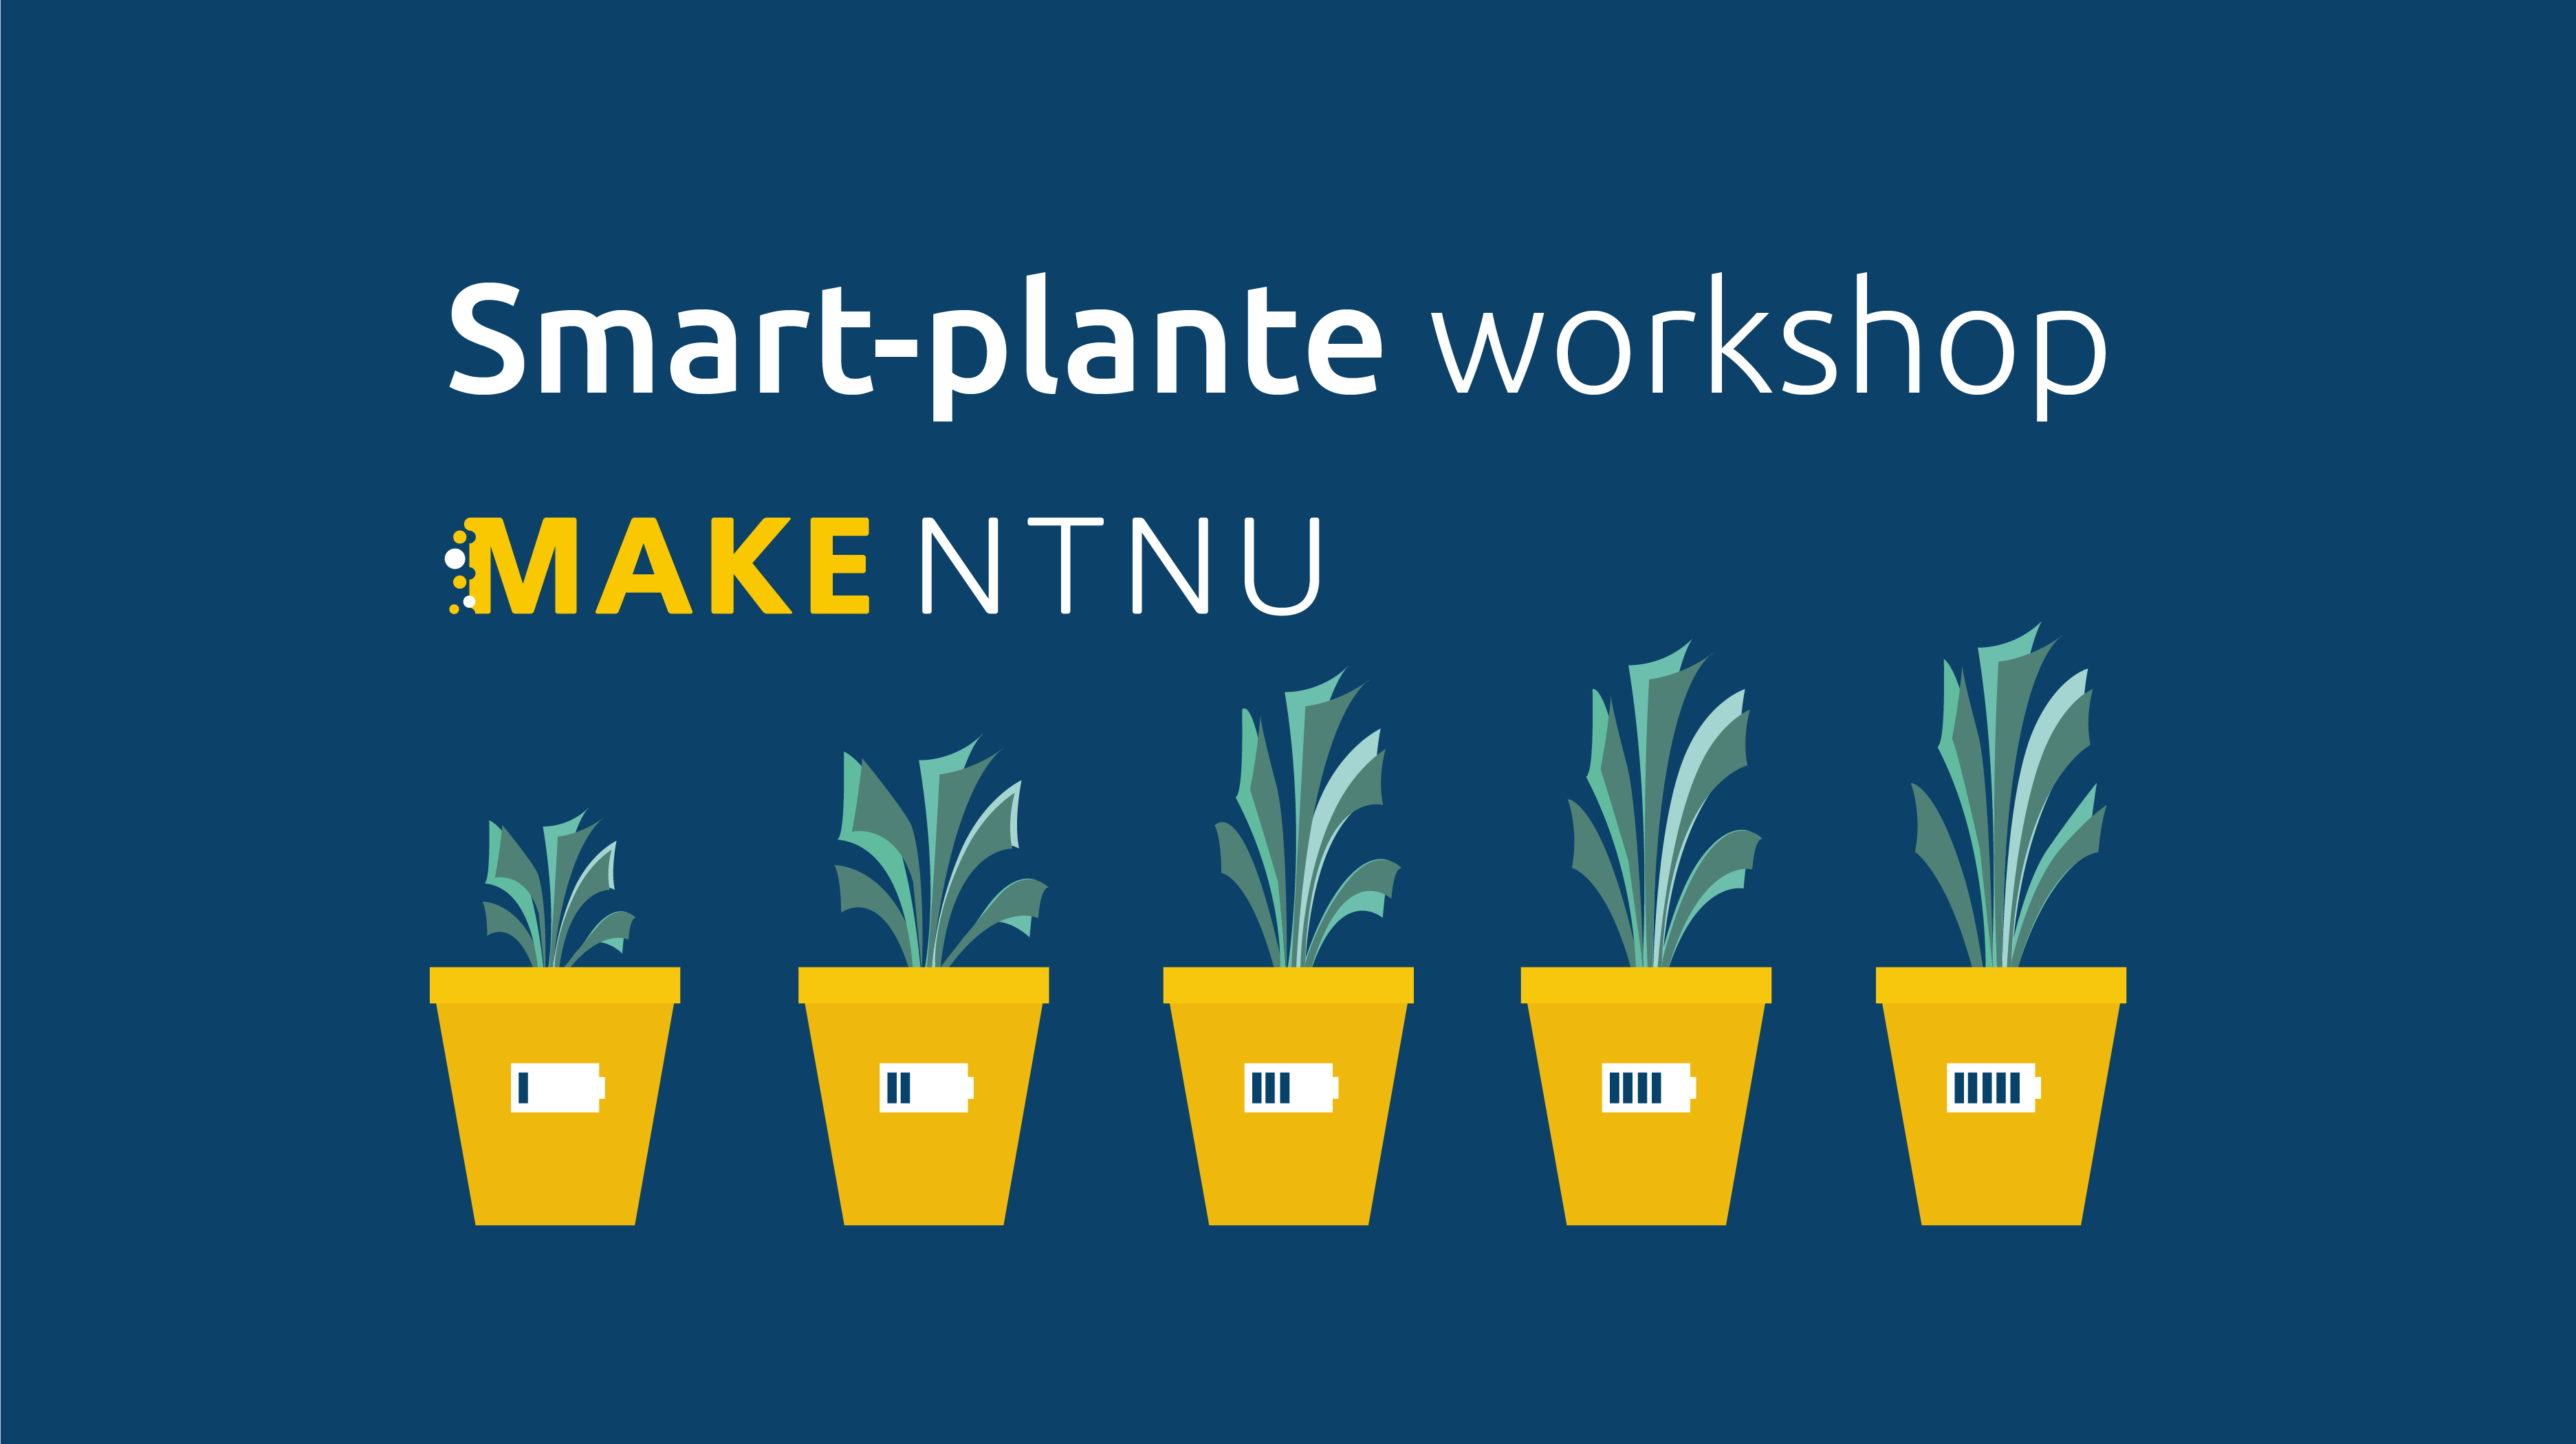 A potted plant which goes from being small with an almost empty battery symbol, to being large with a full battery symbol, in five steps; the text says "Smart plant workshop"